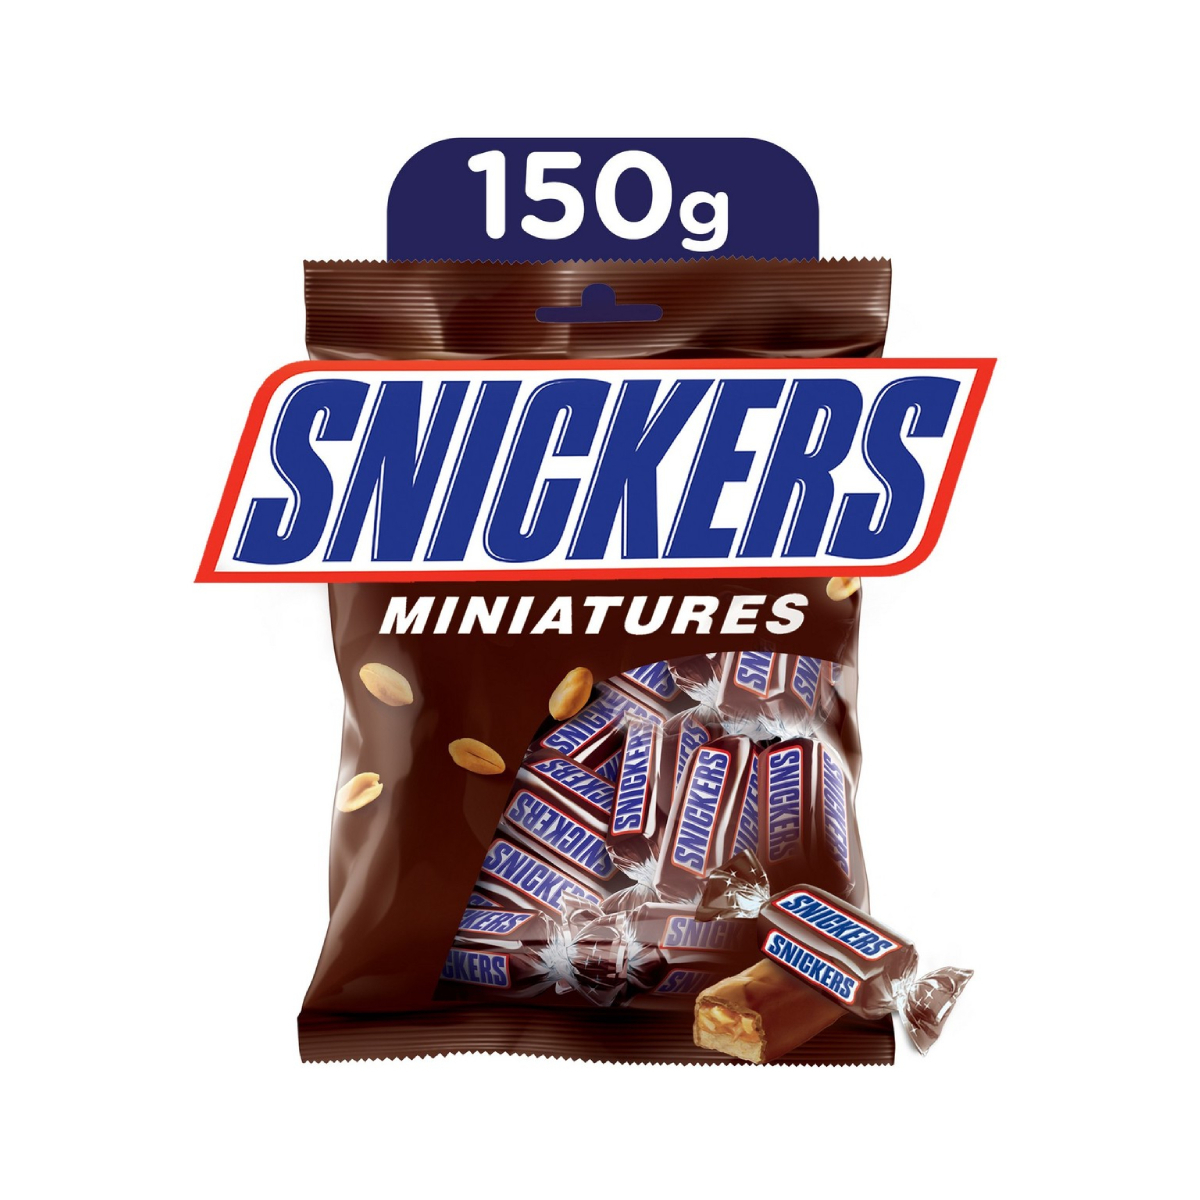 Snickers Miniatures Chocolate Value Pack 2 x 150 g